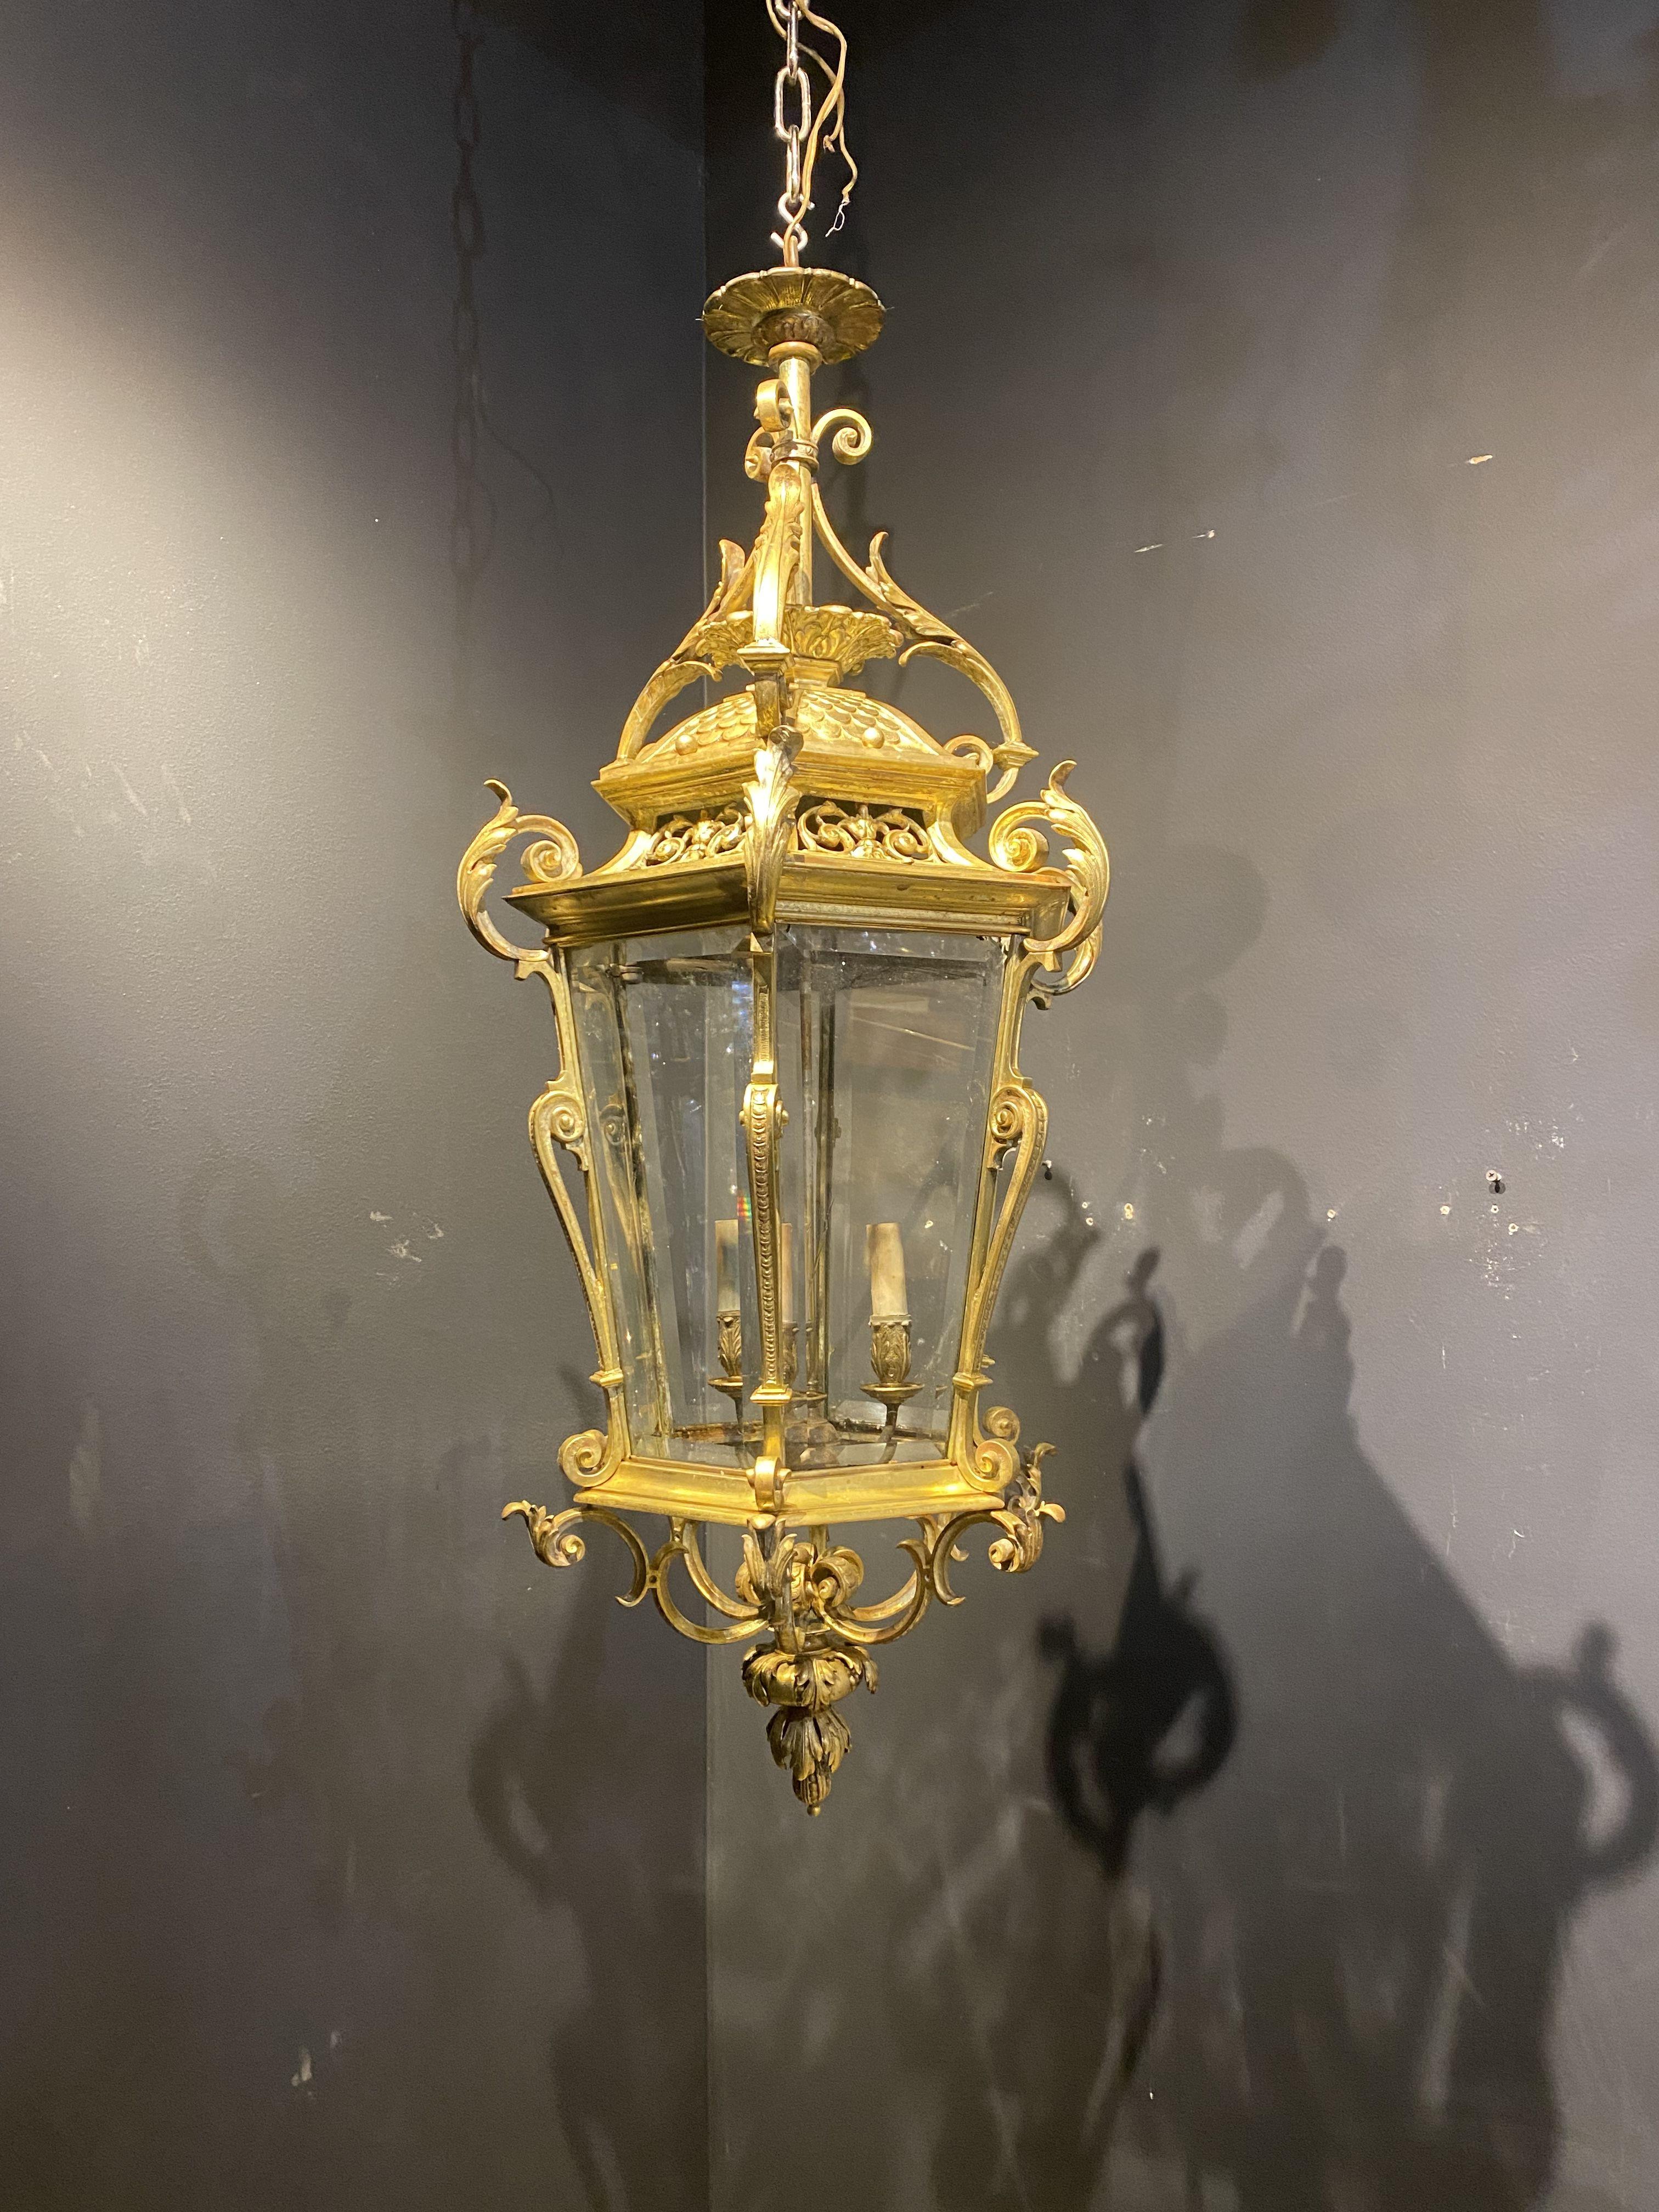 A Caldwell gilt bronze lantern with interior lights and beveled glass panels, circa 1920s. In very good vintage condition.

Dealer: G302YP